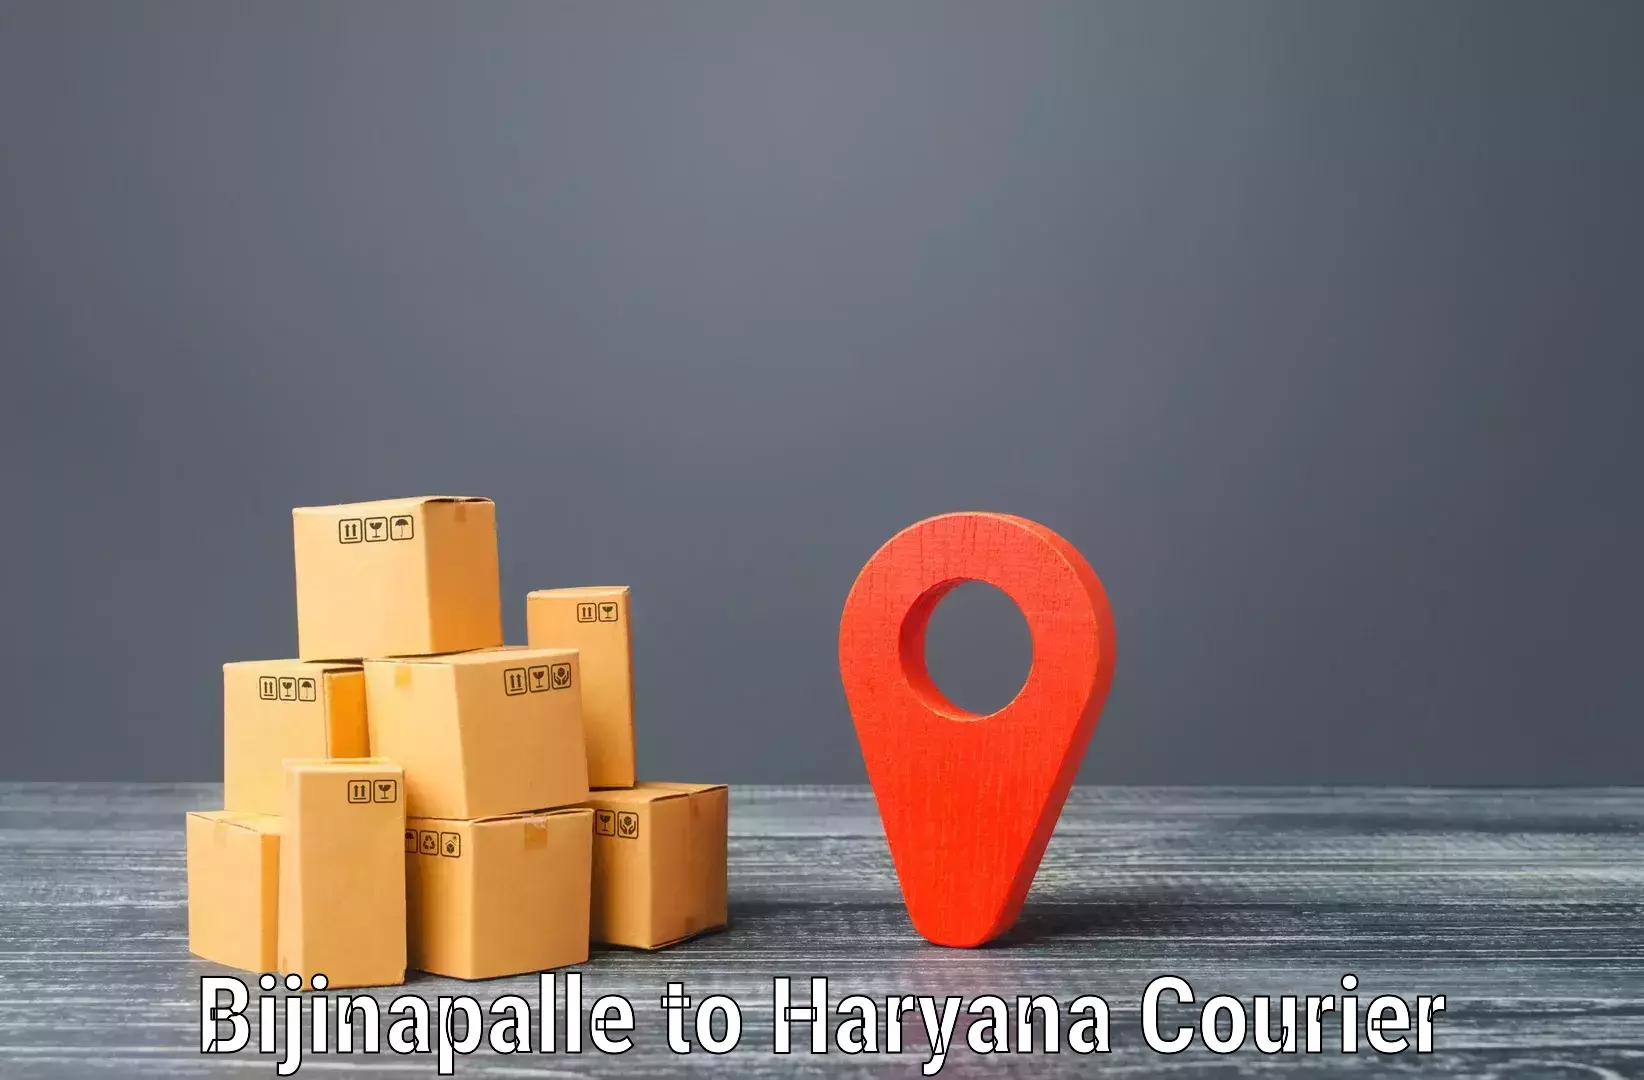 Residential courier service Bijinapalle to Gurugram